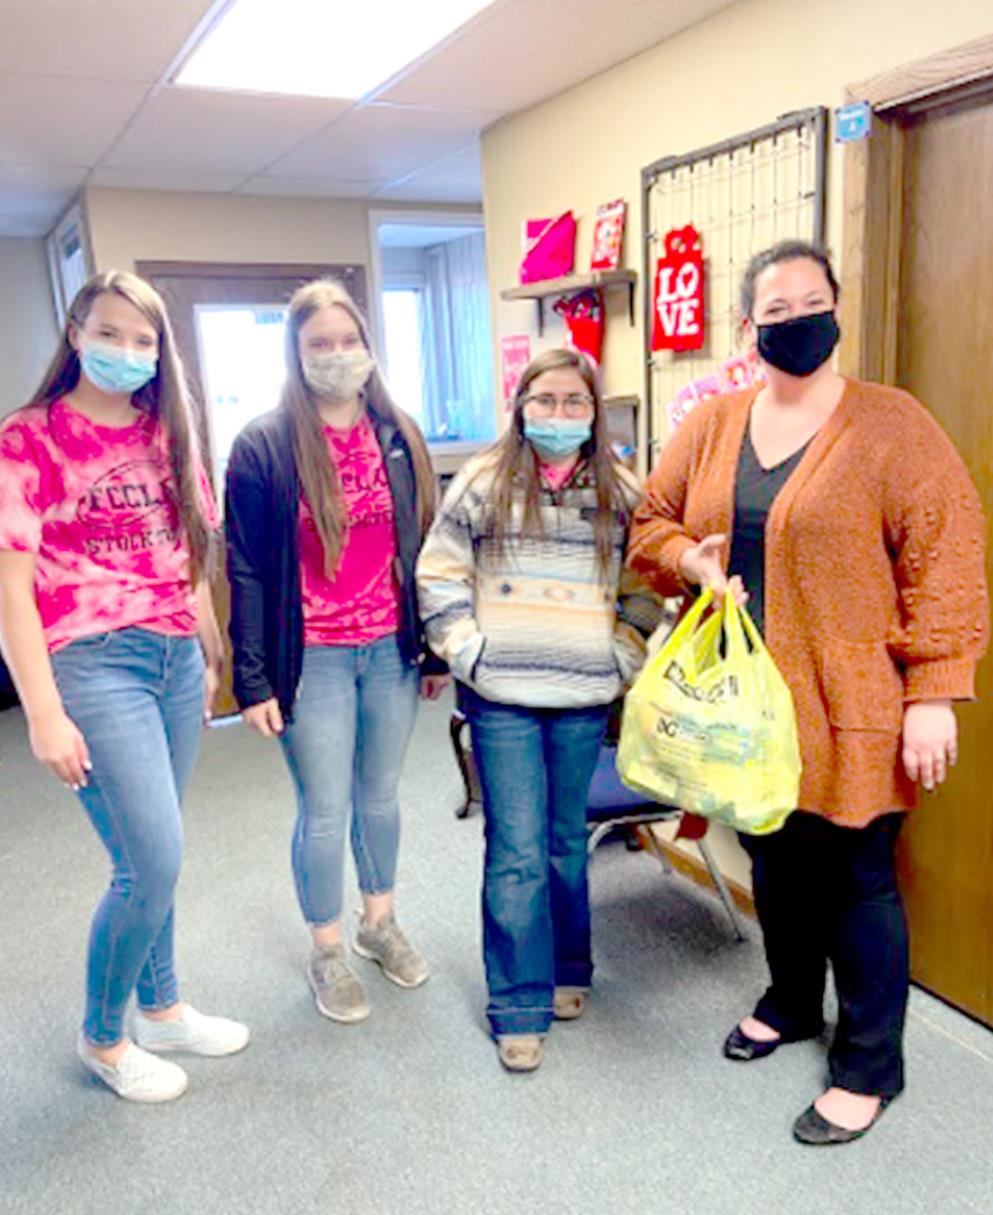 STOCKTON FCCLA STUDENTS Taigen Kerr, Savvy Gray and Tierra Yohon delivered “Blessing Bags” to Brenda Reiners with Under His Wings Family Shelter in Plainville (left picture); to Pattie Jackson (center picture on far left) with the Stockton Food Pantry; and Kelsey Hogan with Options Domestic Violence Services of Hays (right picture). The STAR project was designed to gather food and personal hygiene items into Blessing Bags to help benefit families in our area.